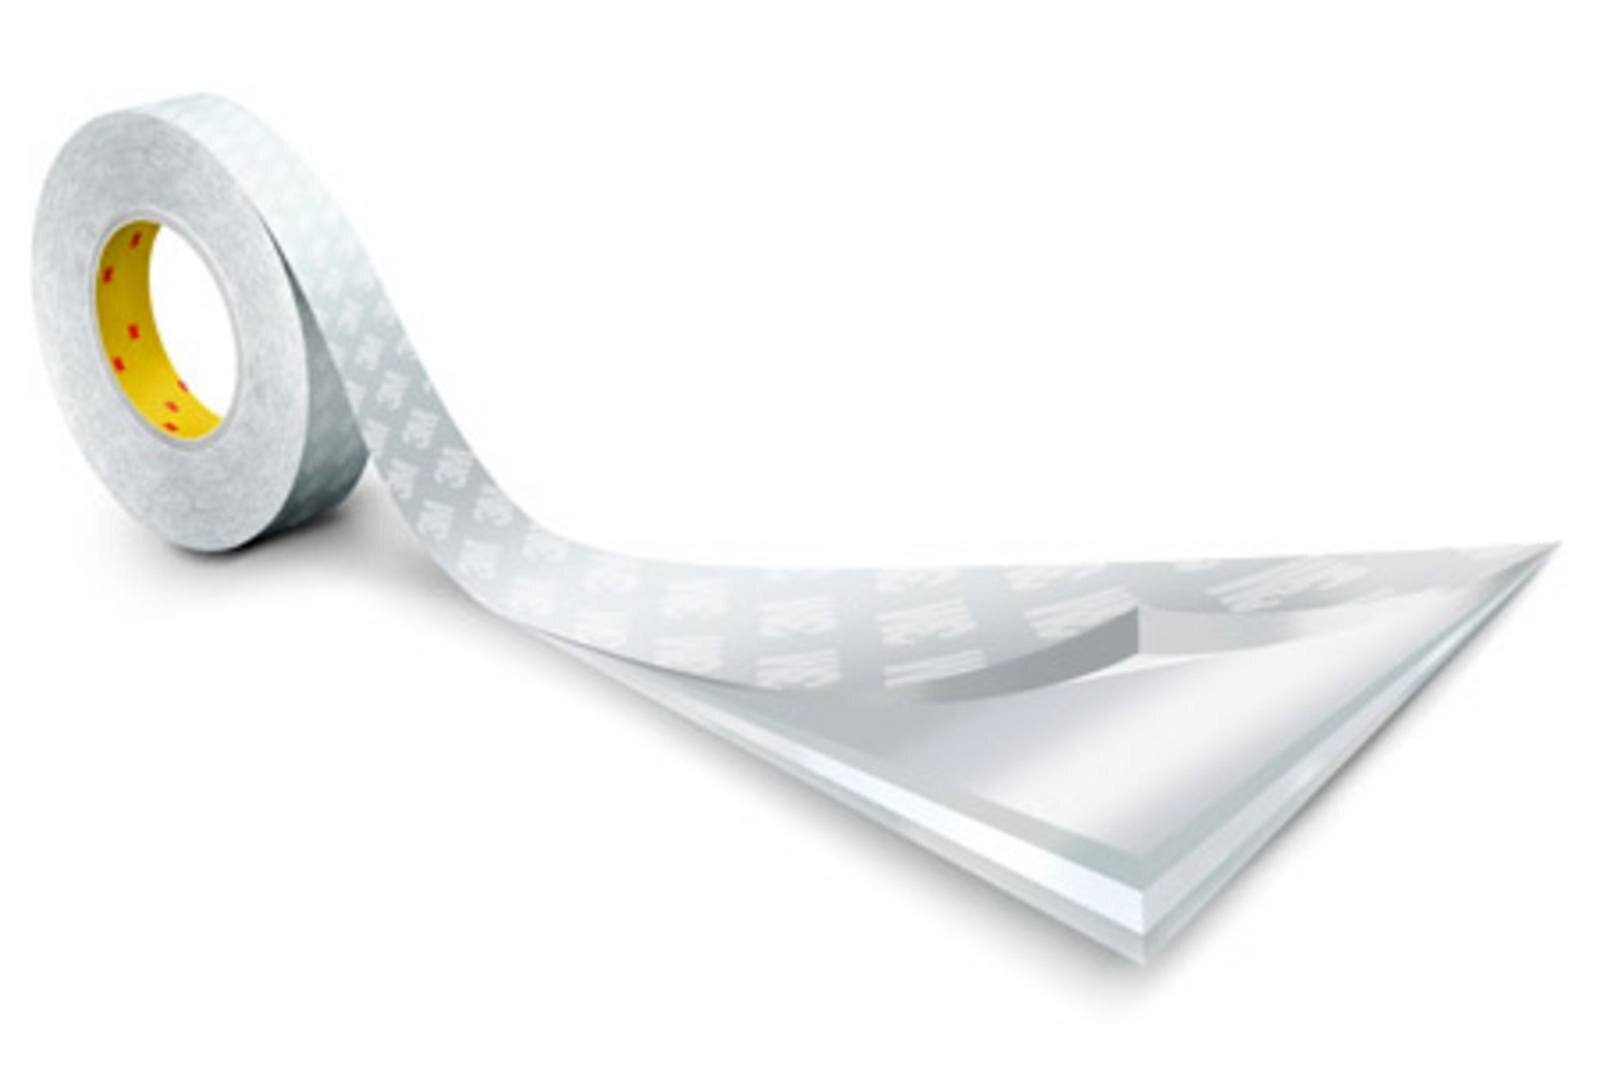 3M Double-sided adhesive tape with non-woven paper backing 9448A, white, 1200 mm x 50 m, 0.15 mm